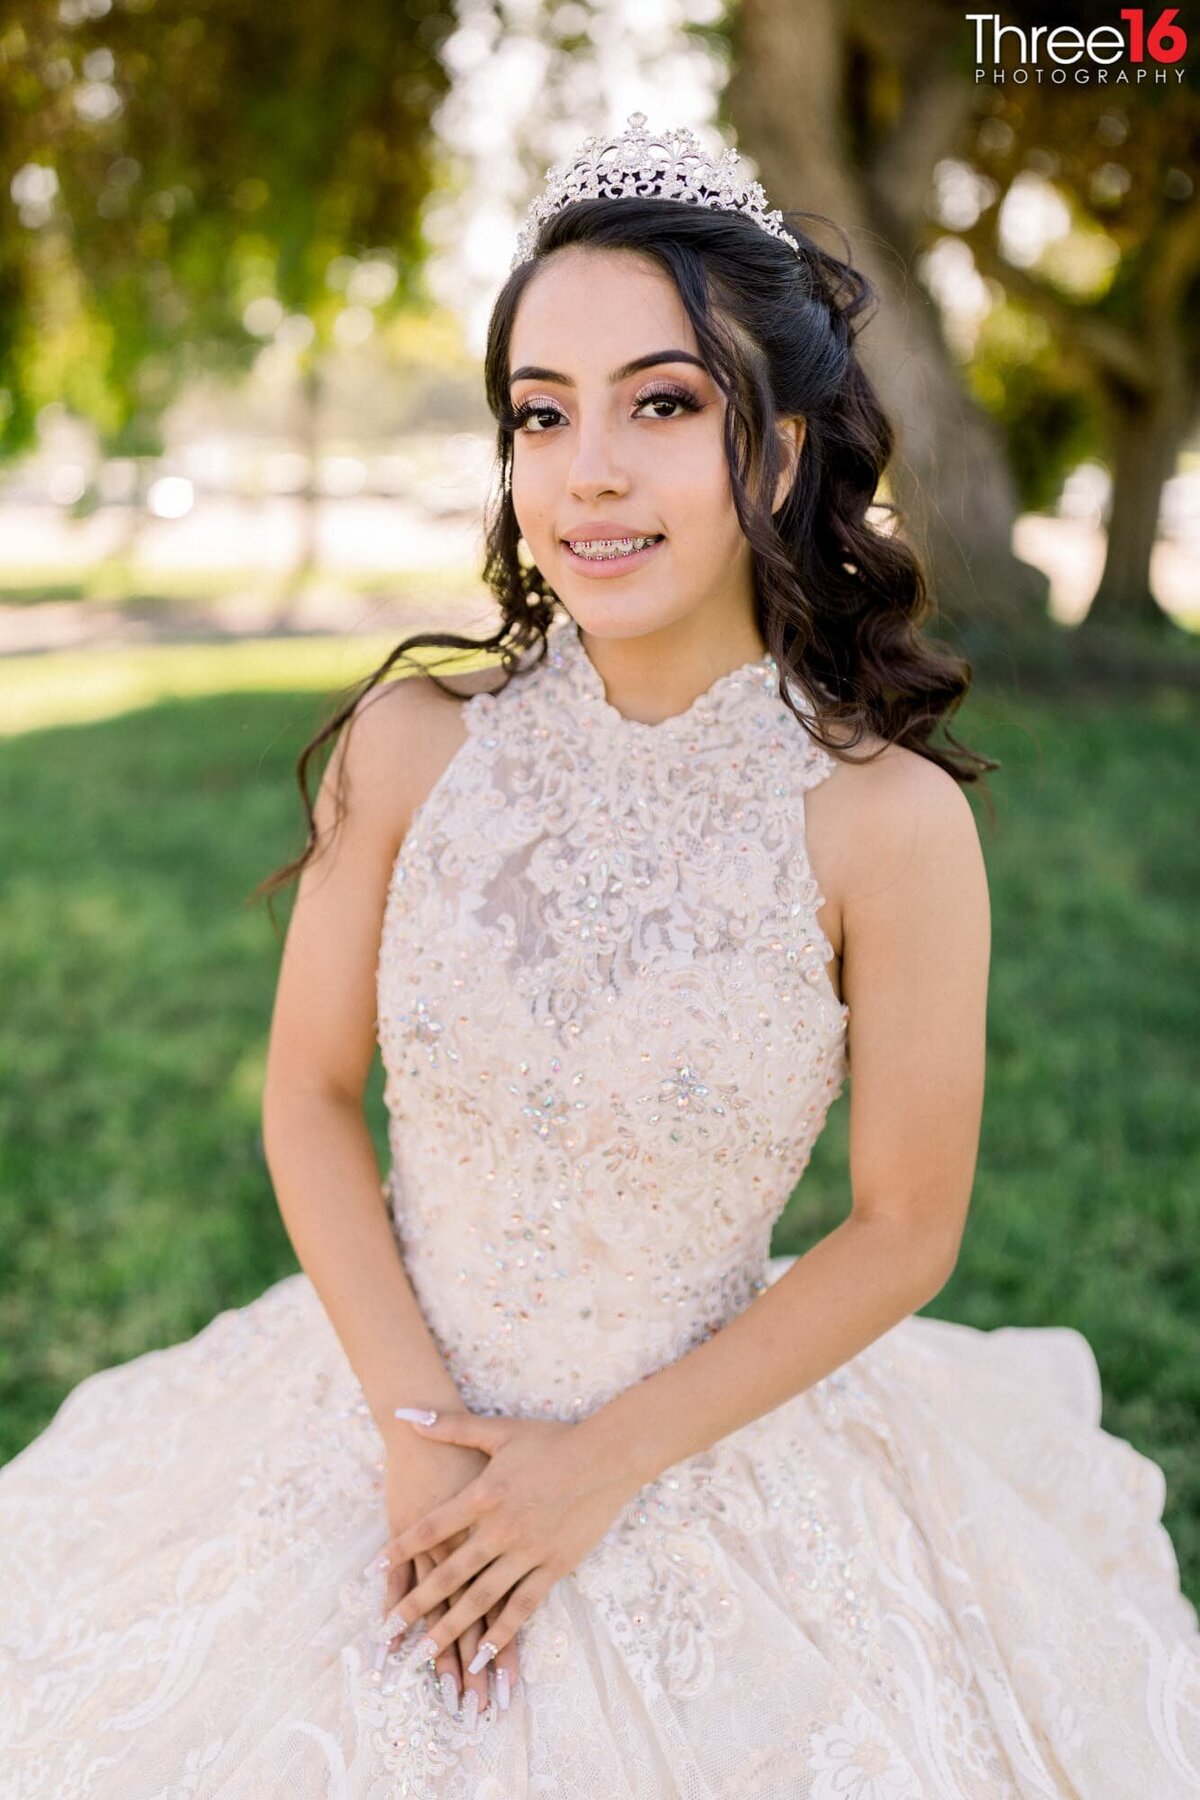 Young lady dressed in a white gown and a tiara celebrating her quinceanera